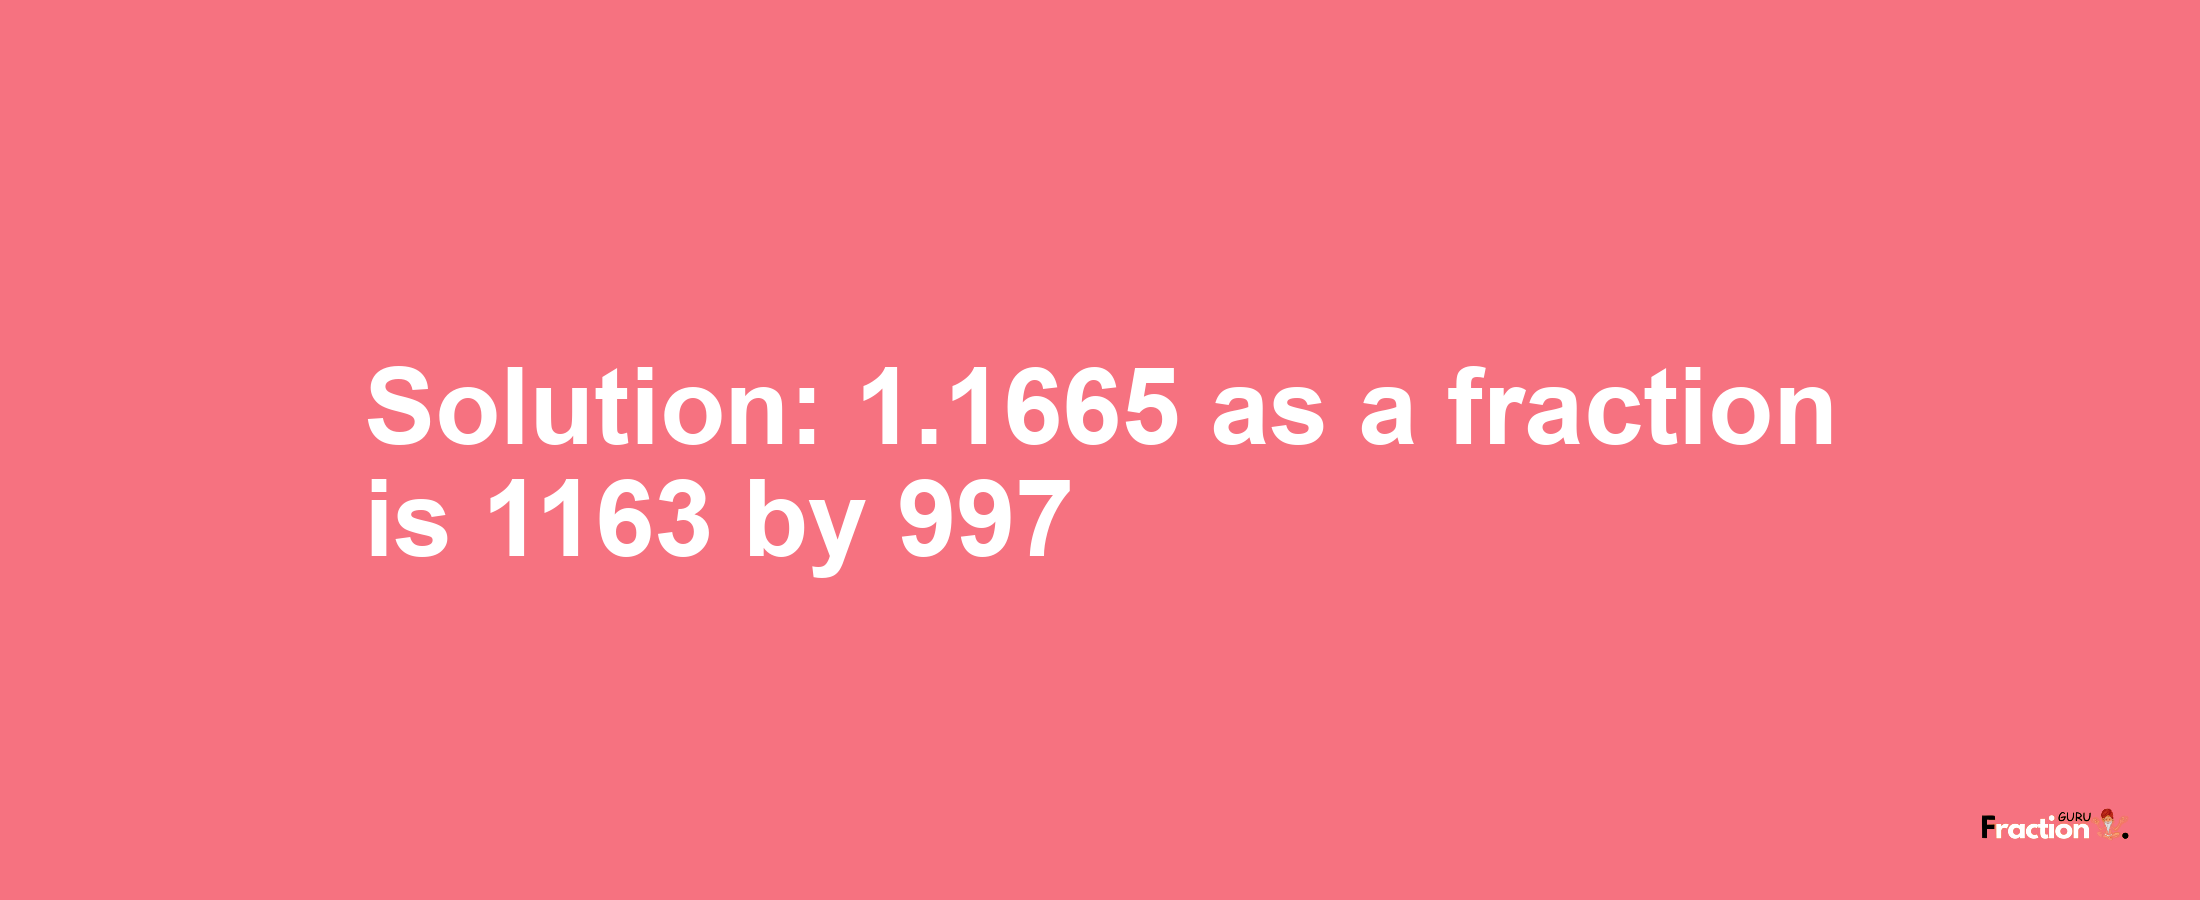 Solution:1.1665 as a fraction is 1163/997